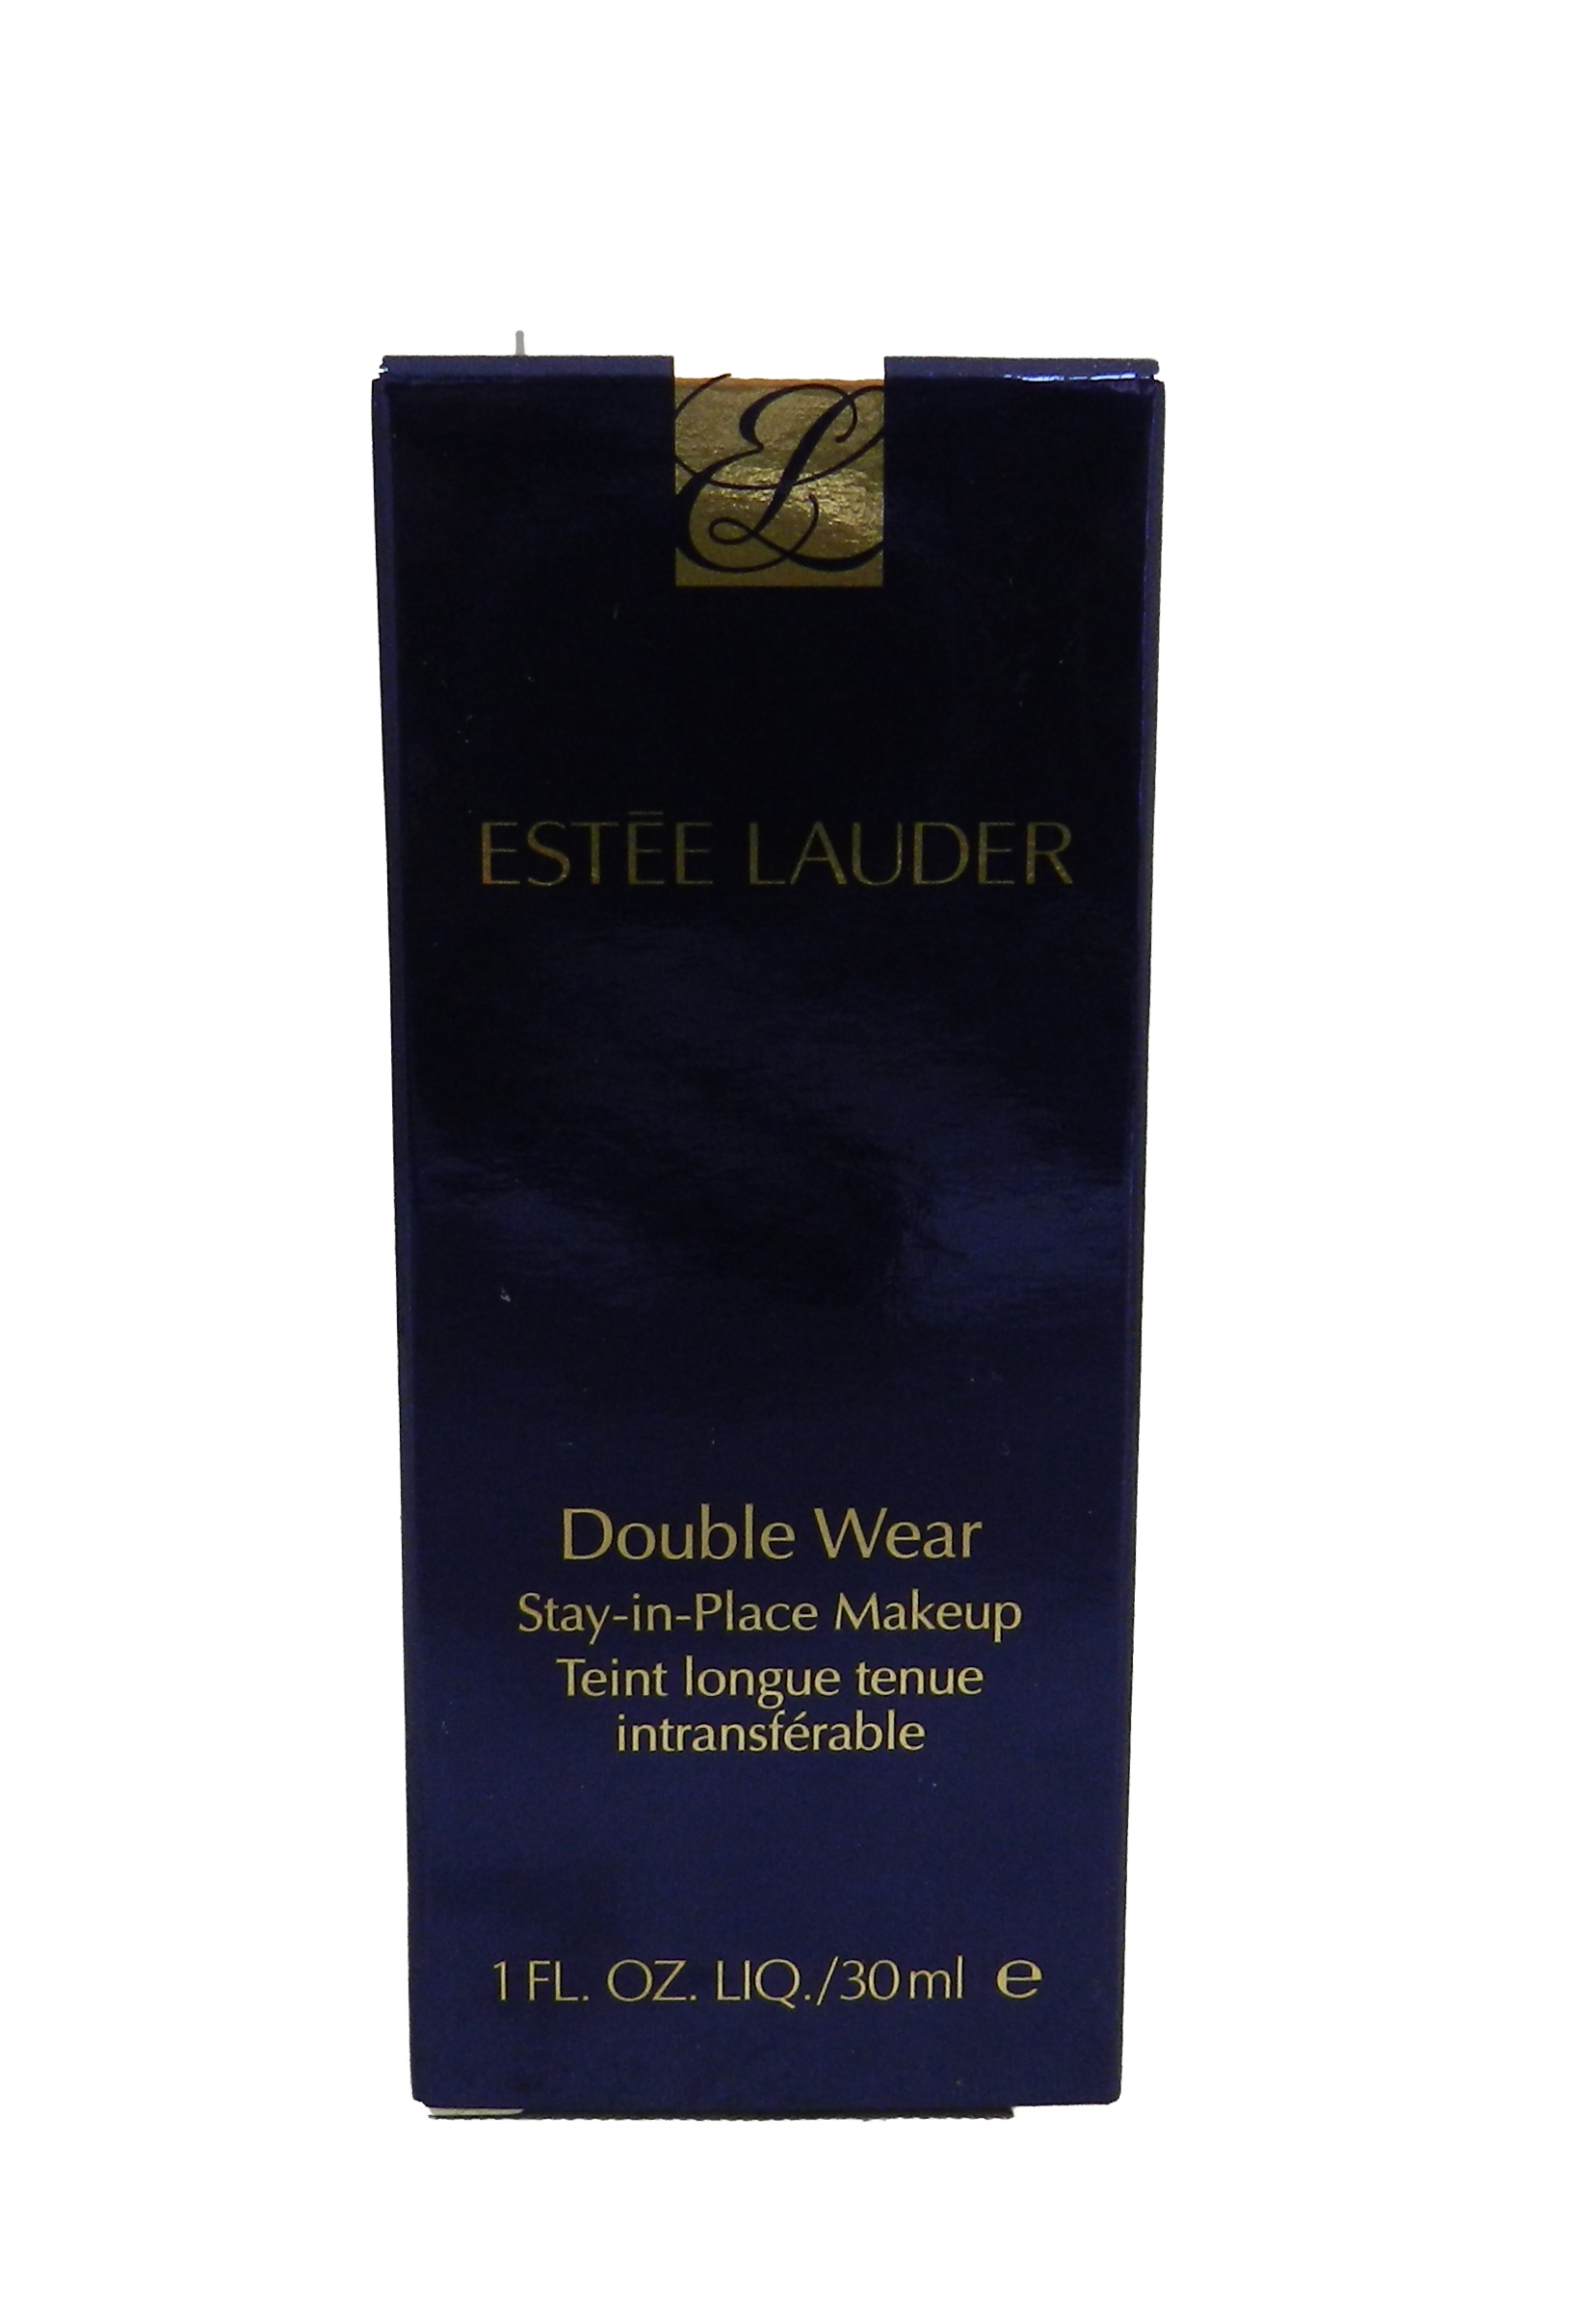 Estee Lauder Double Wear Stay-in-Place Makeup SPF10 - 2W1 Dawn, 1 oz - image 2 of 2